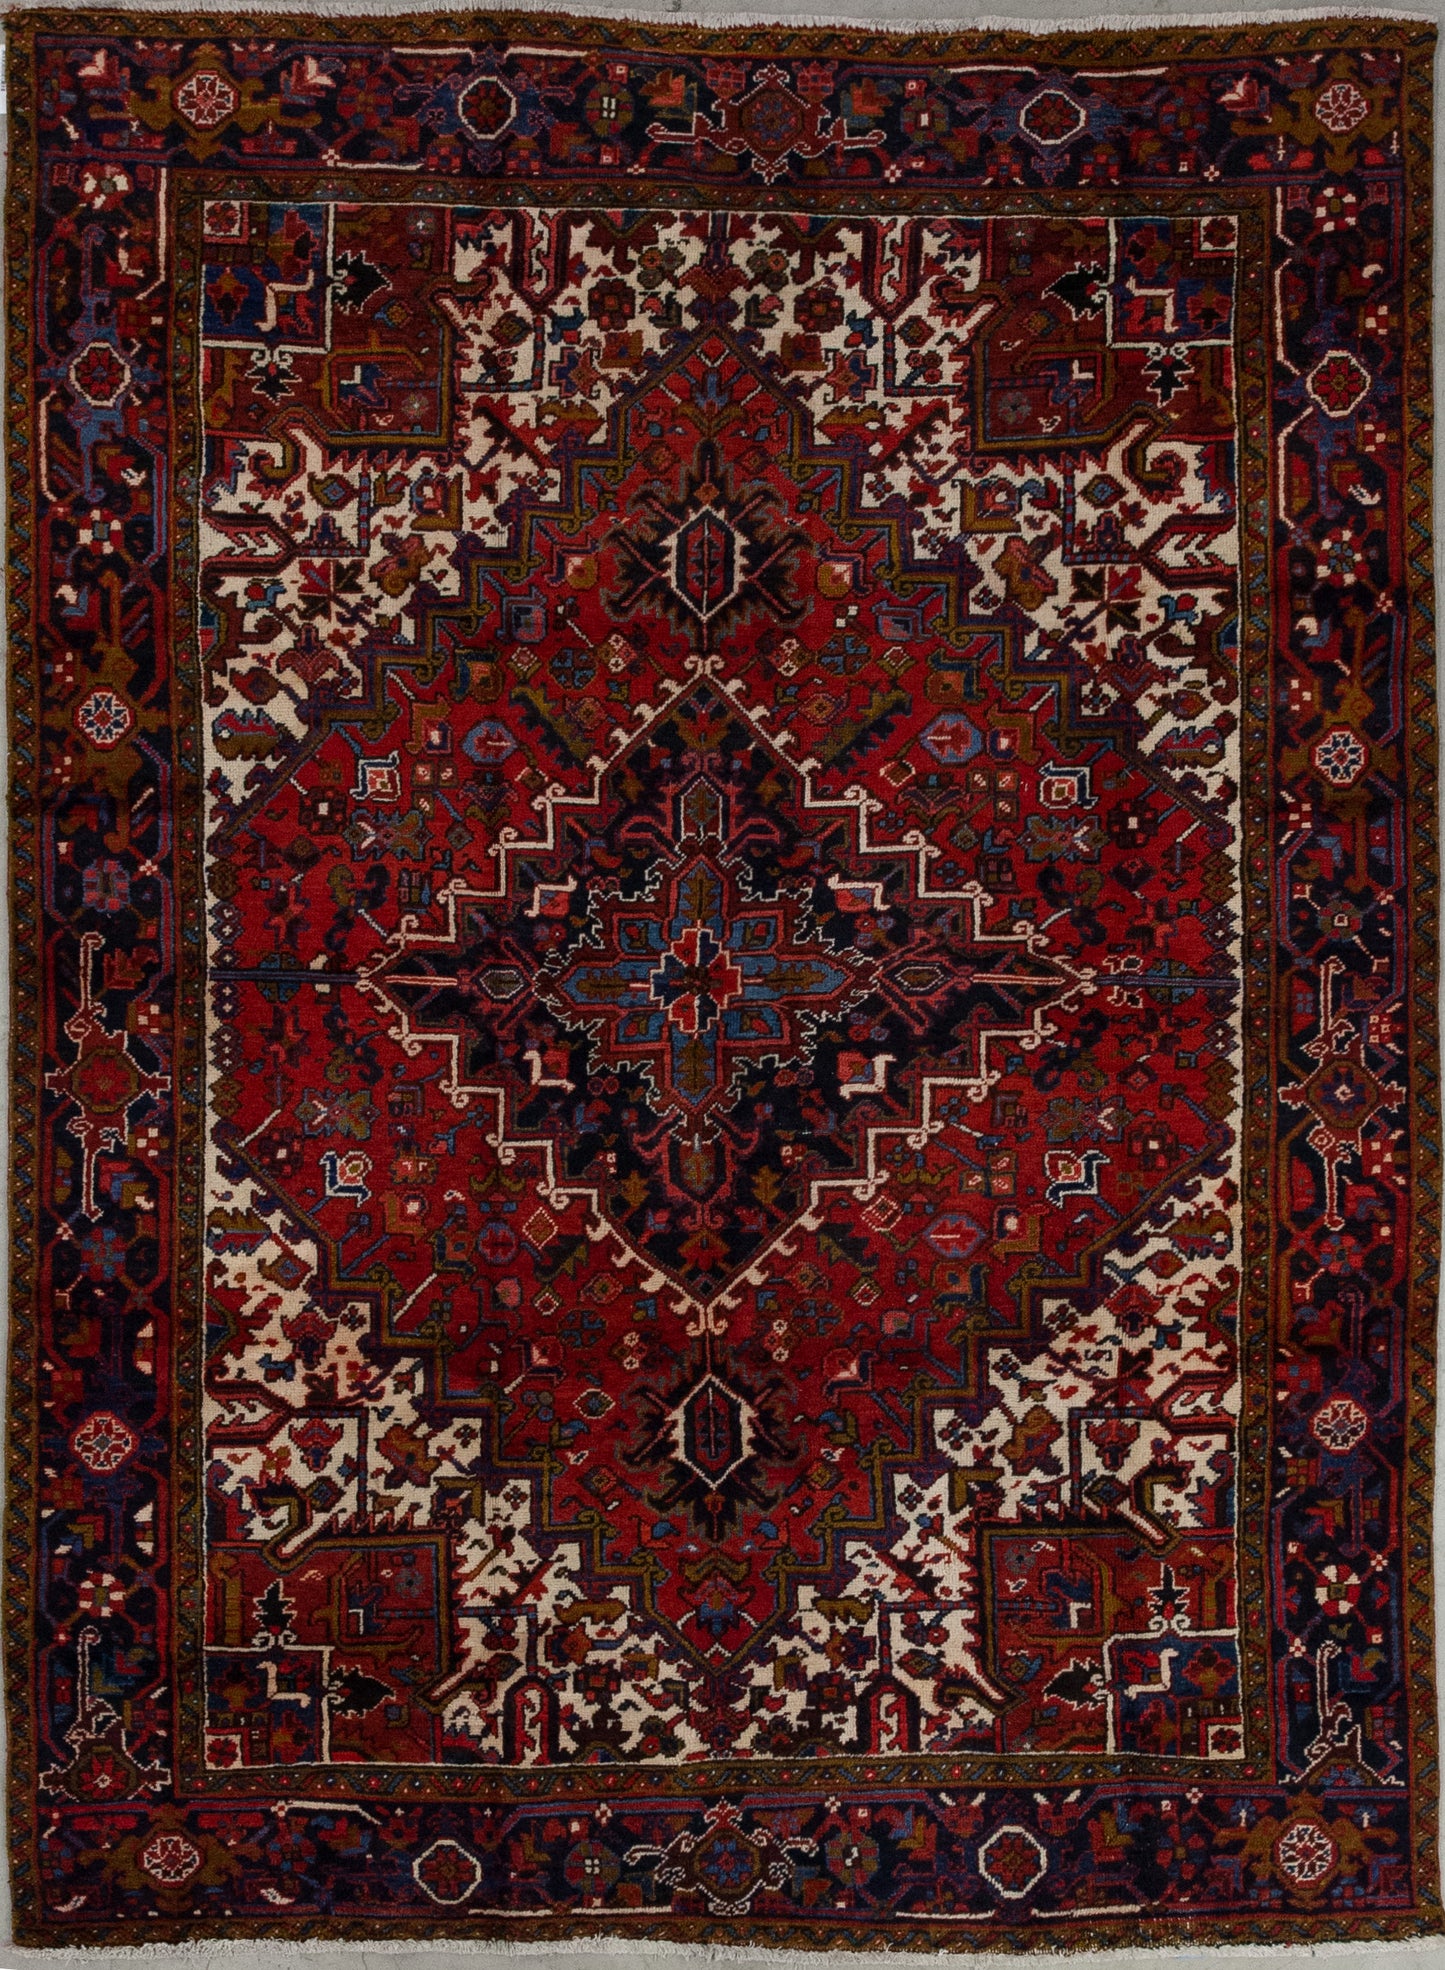 This remarkable rug comes with a fiery color combination to evoke passion wherever you lay it down. The colors of the carpet are red as the dominant tone, olive green, variations of blue, black, and white. The artwork features a large red rhomb which is nesting two more, and all of them are patterned with abstract types of flowers and leaves.